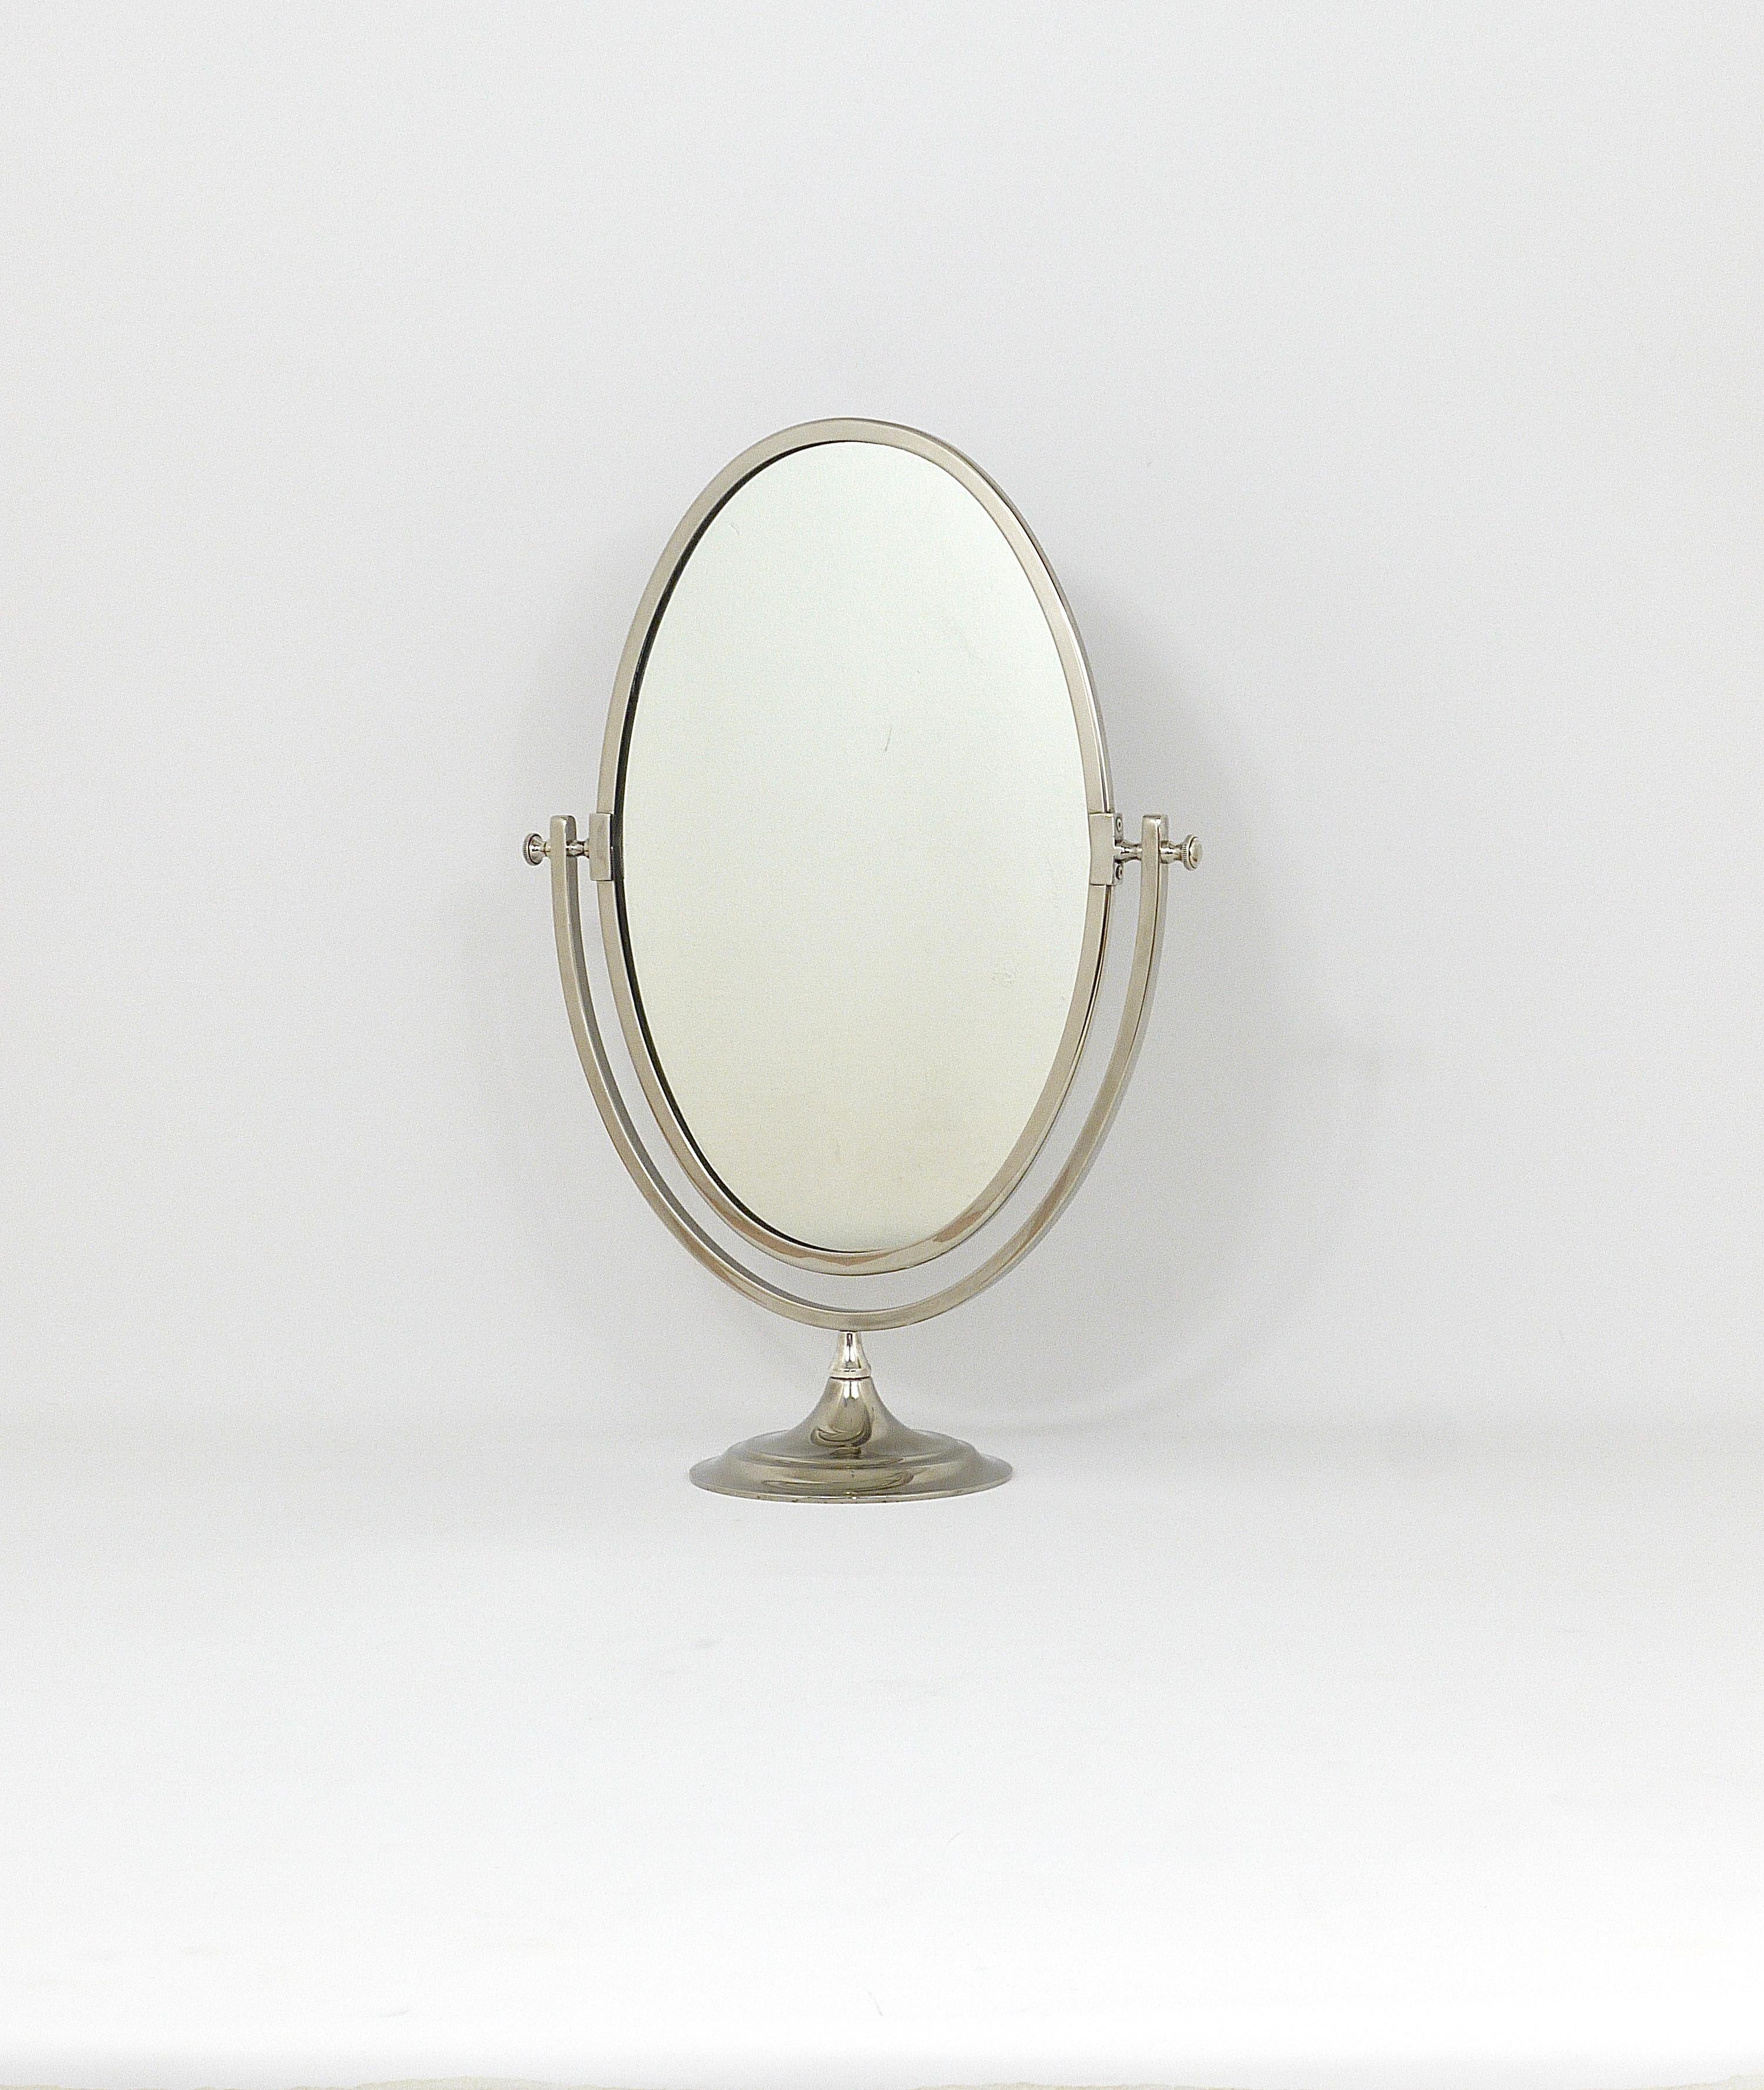 A beautiful silver plated freestanding brass table mirror from the 1950s, made in England. It has an oval mirror on a round base, which is adjustable in tilt. In very good condition with very marginal patina. The total height is 23 in. and the